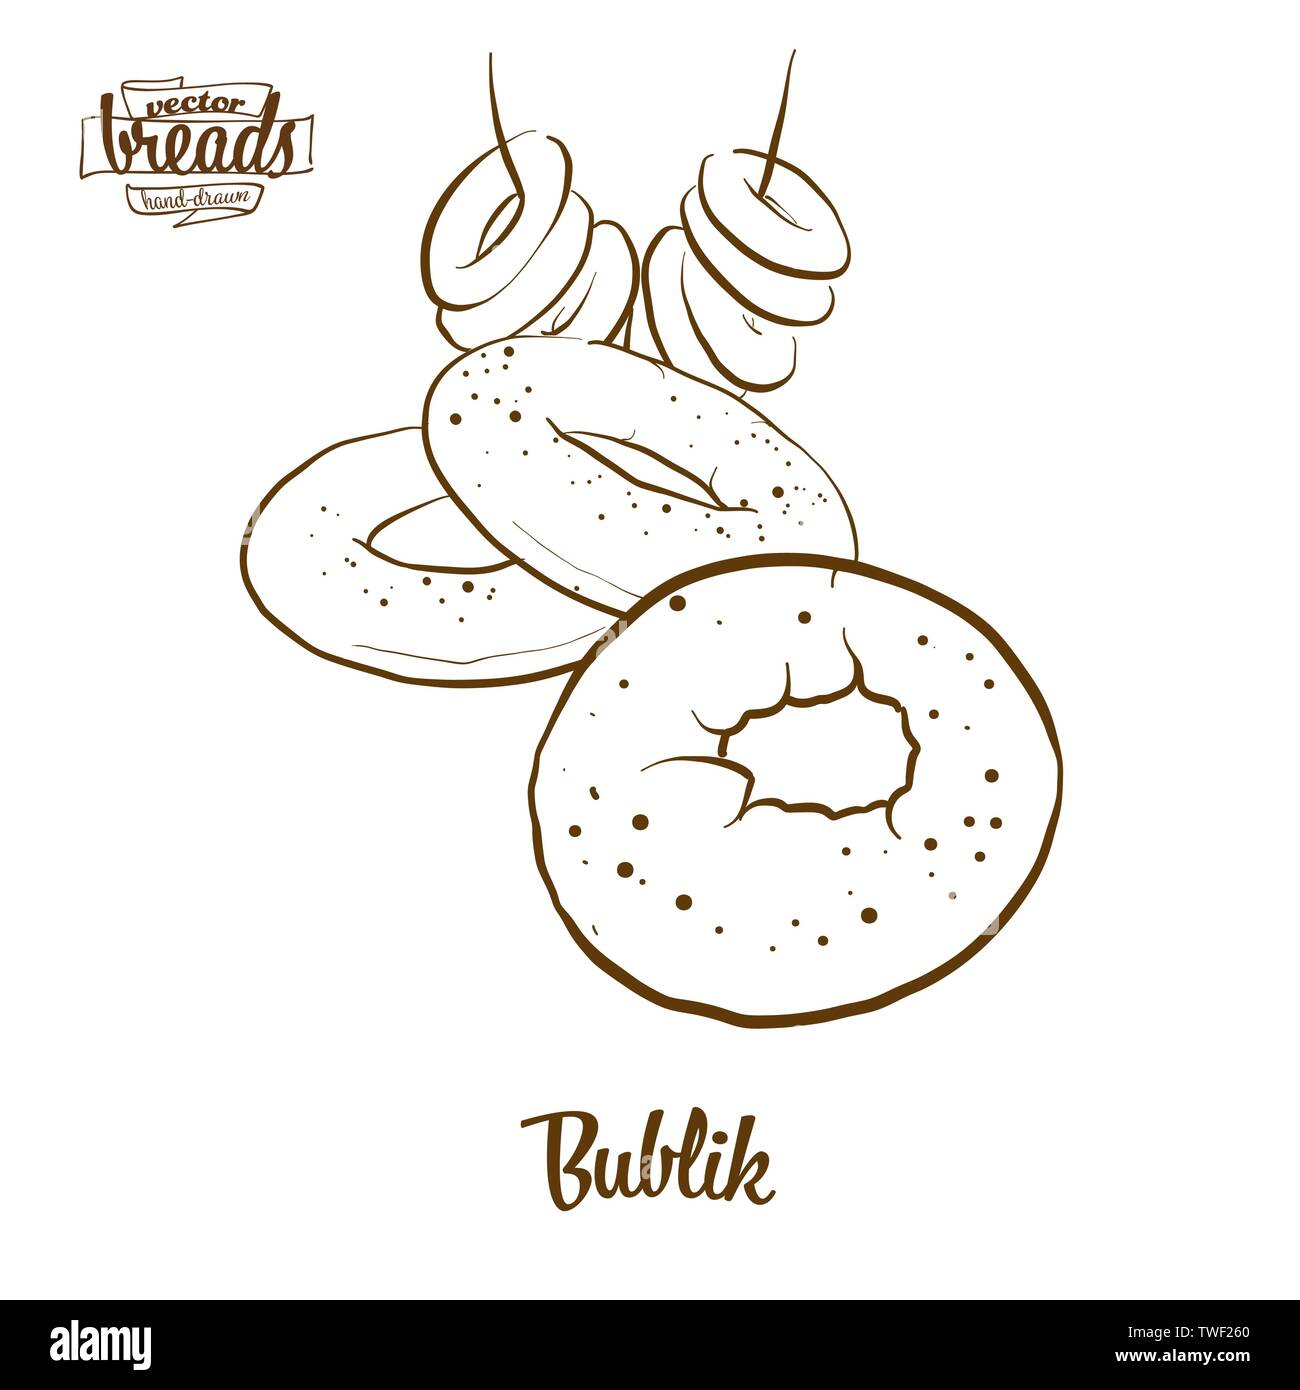 Bublik bread vector drawing. Food sketch of Wheat bread, usually known in Poland. Bakery illustration series. Stock Vector